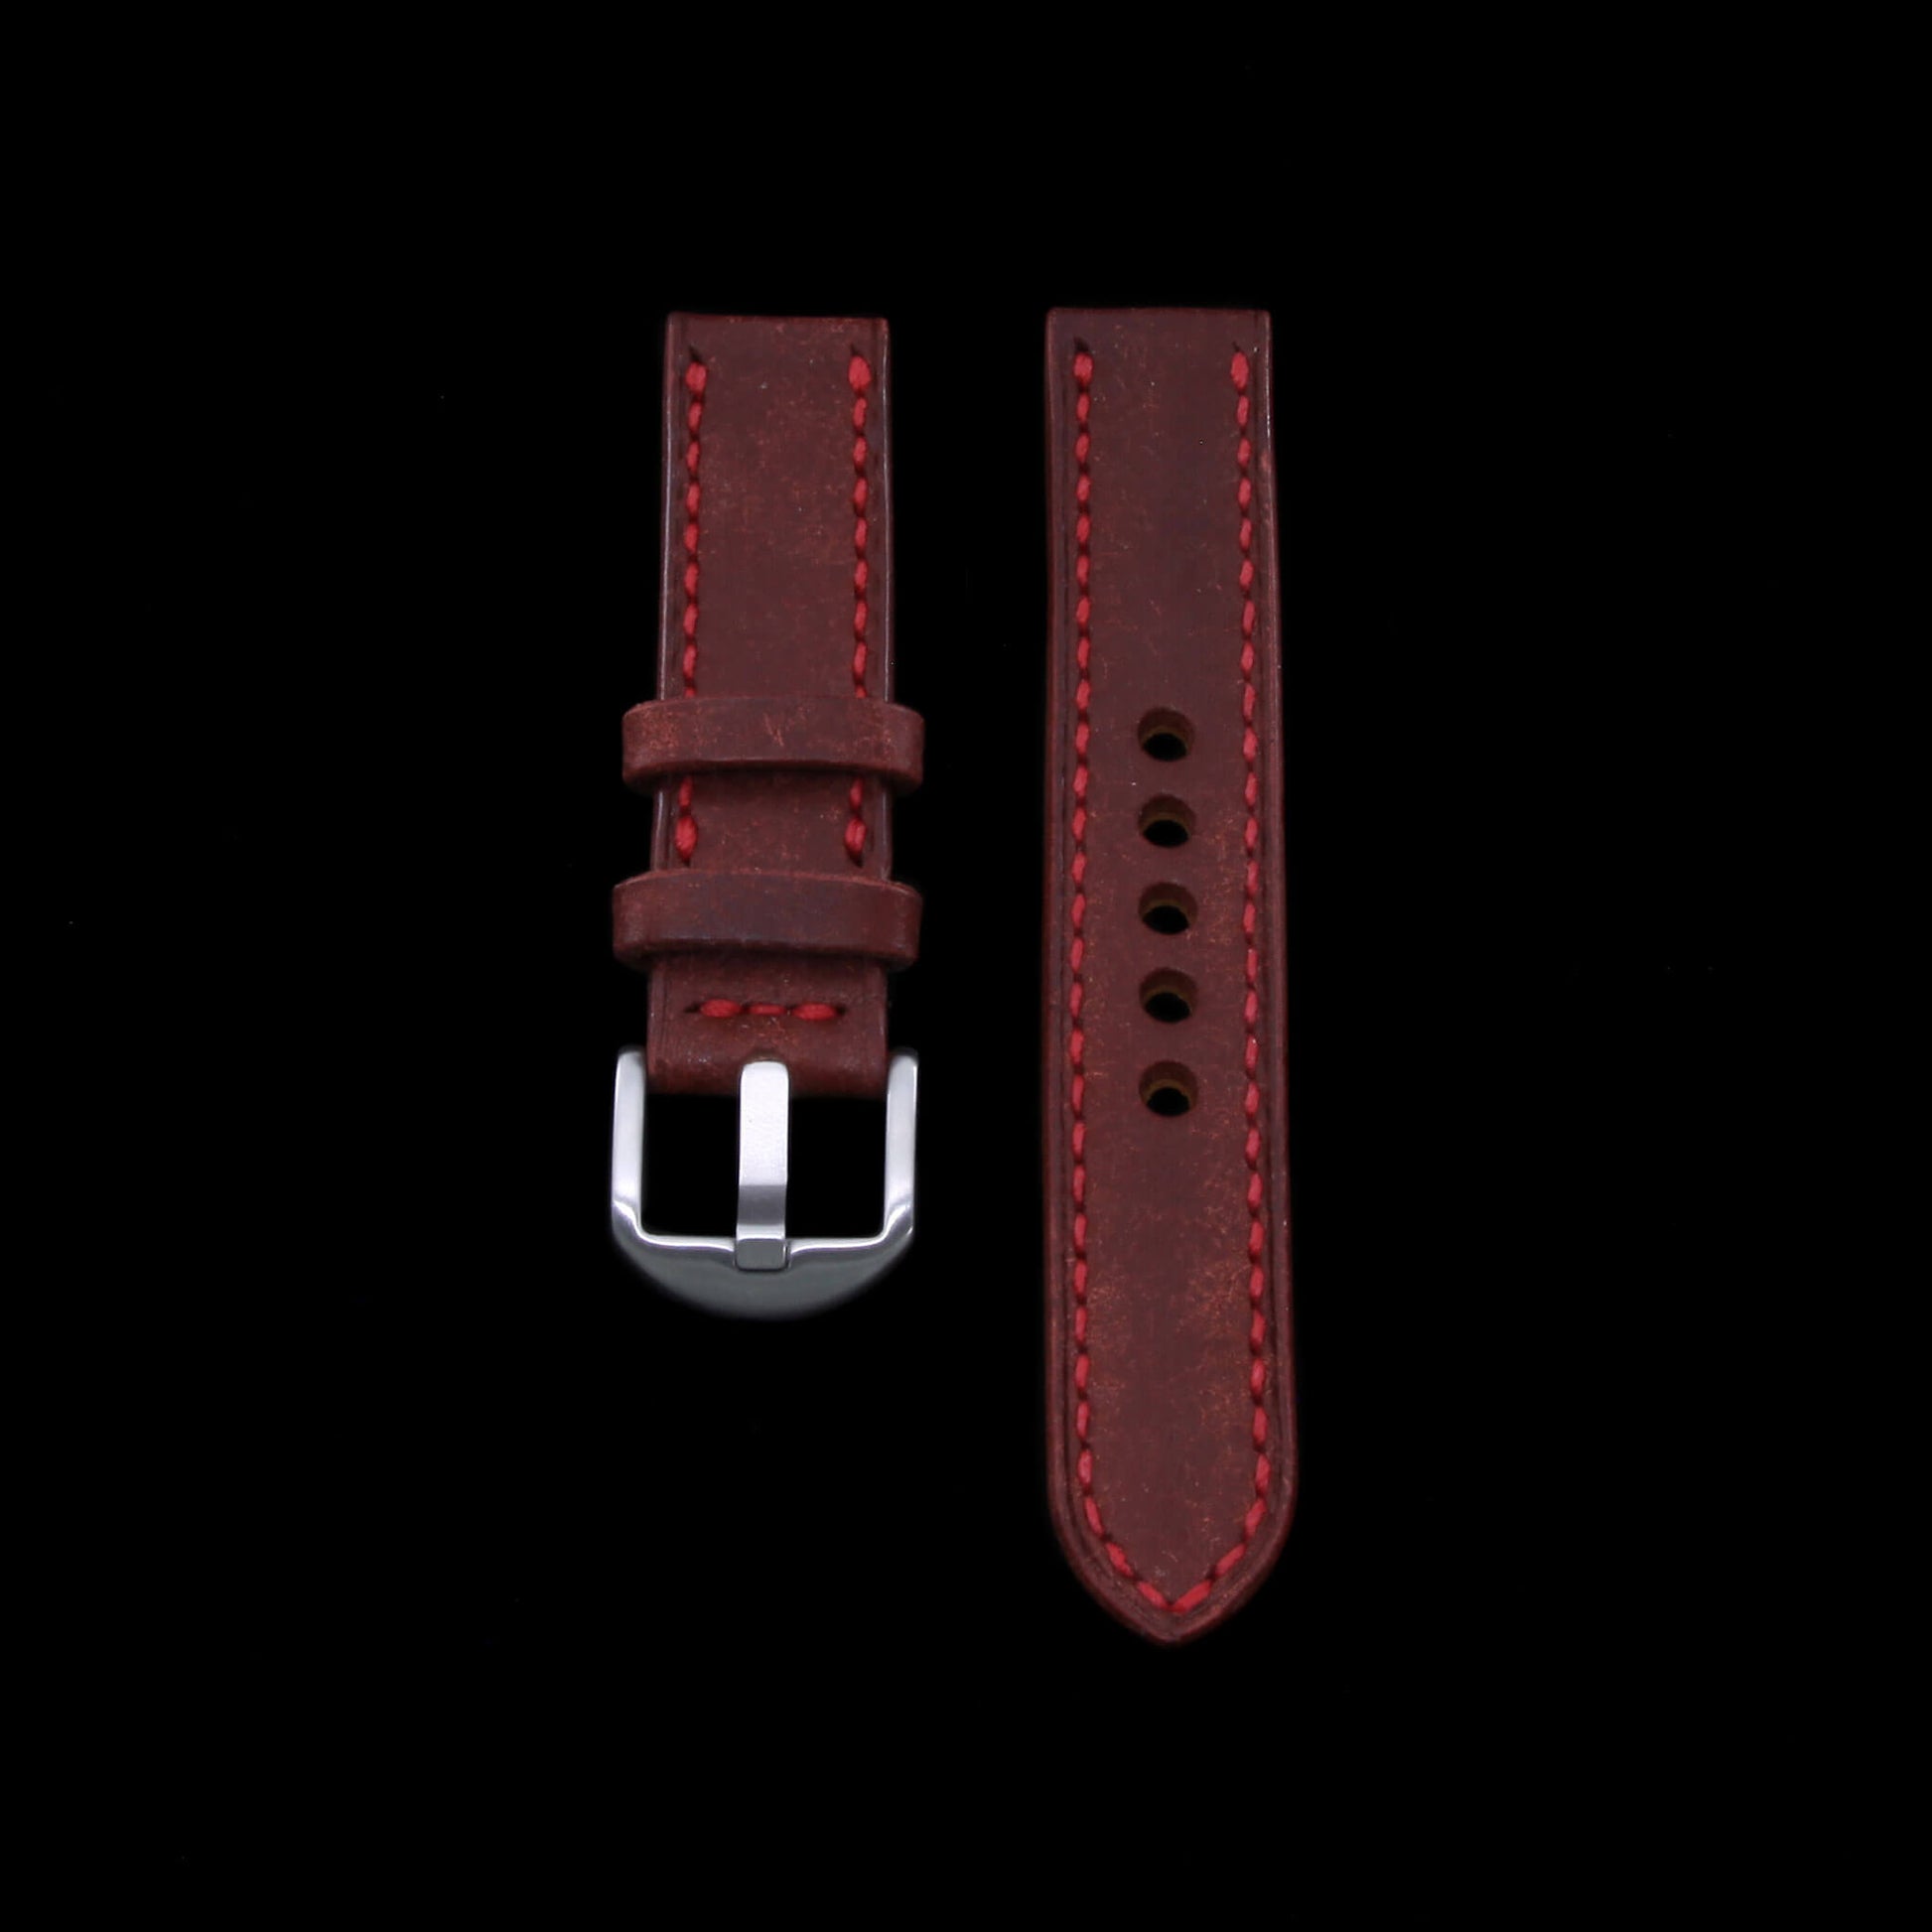 2nd View of 2-Piece Full Stitch Leather Watch Strap, made with Pueblo Cocinella full grain Italian veg-tanned leather by Cozy Handmade